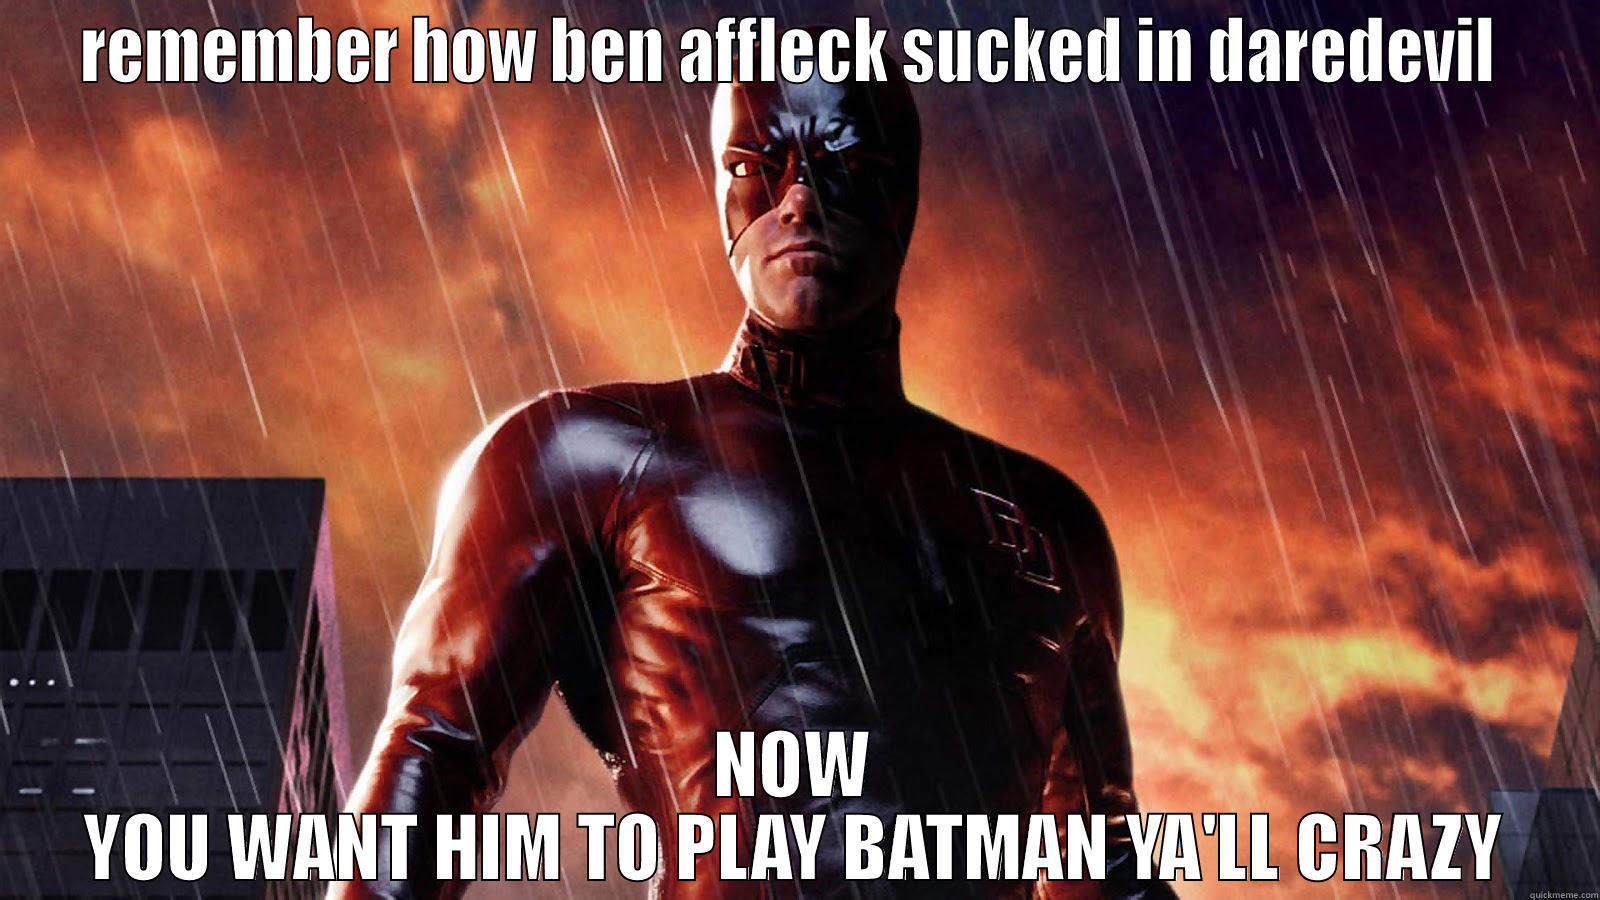 REMEMBER HOW BEN AFFLECK SUCKED IN DAREDEVIL  NOW YOU WANT HIM TO PLAY BATMAN YA'LL CRAZY Misc